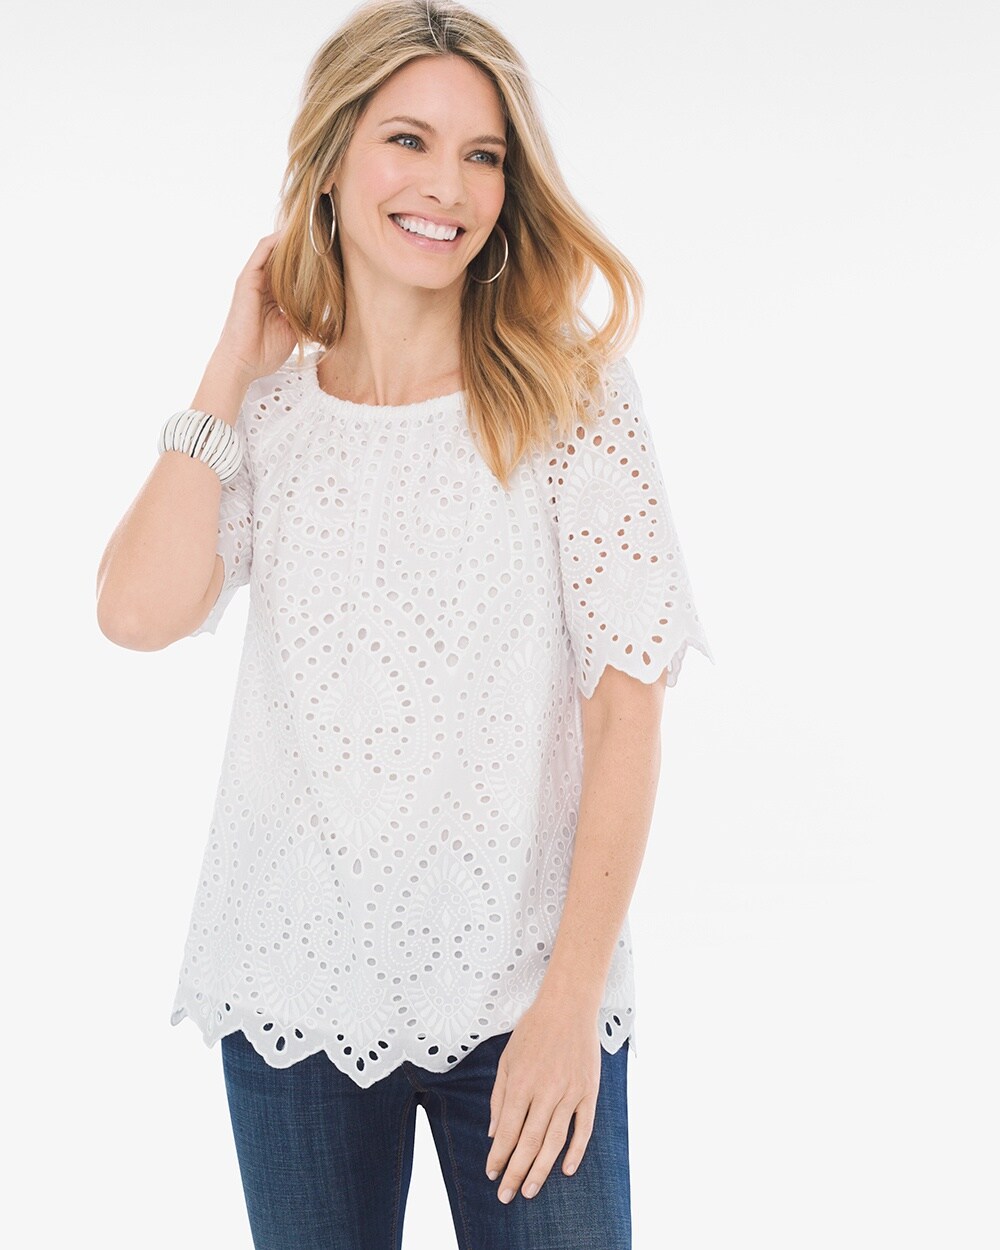 Eyelet Embroidery Top